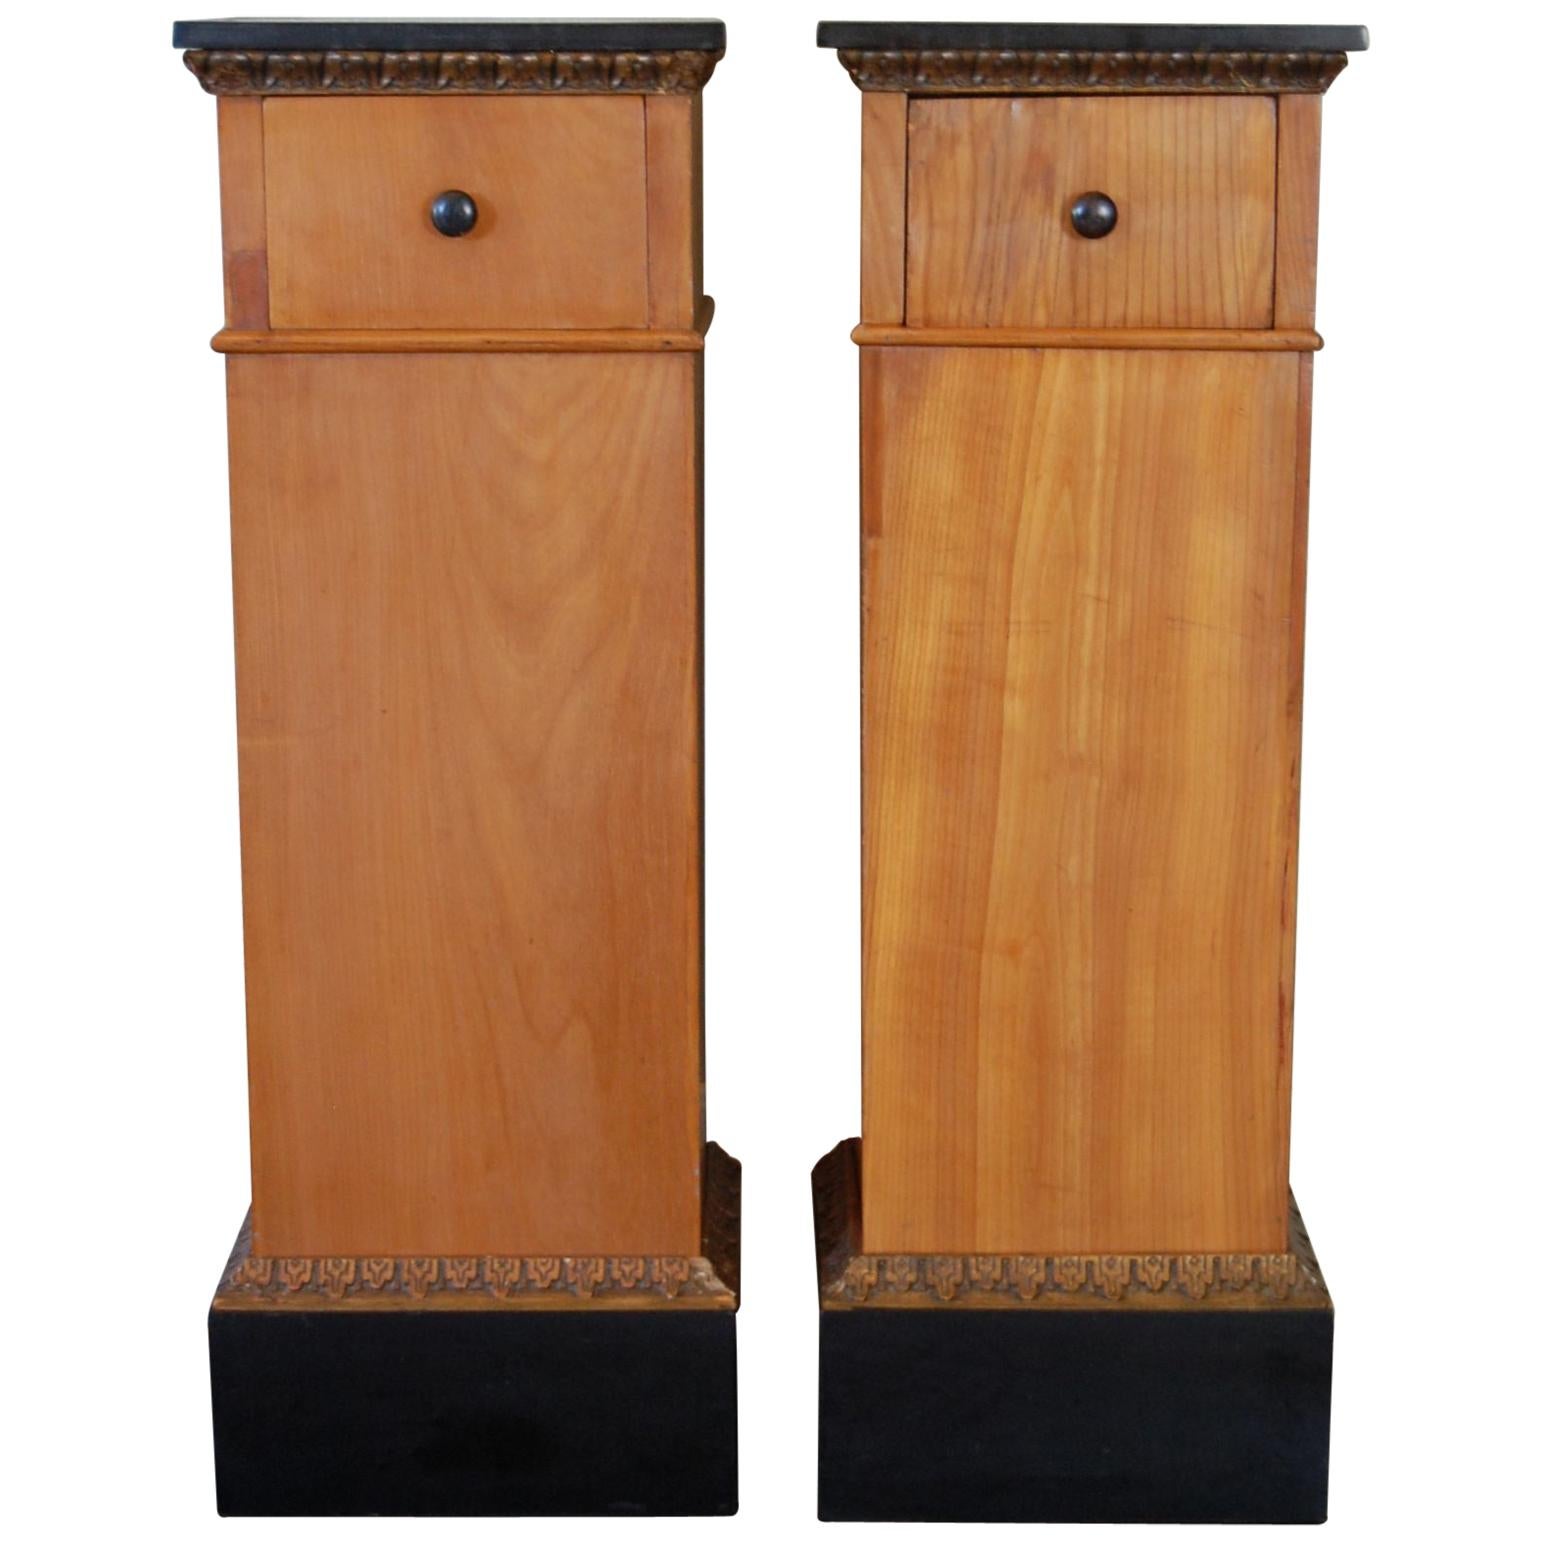 Pair Biedermeier Pedestals circa 1800-1830 with Black Lacquered Tops & Drawers